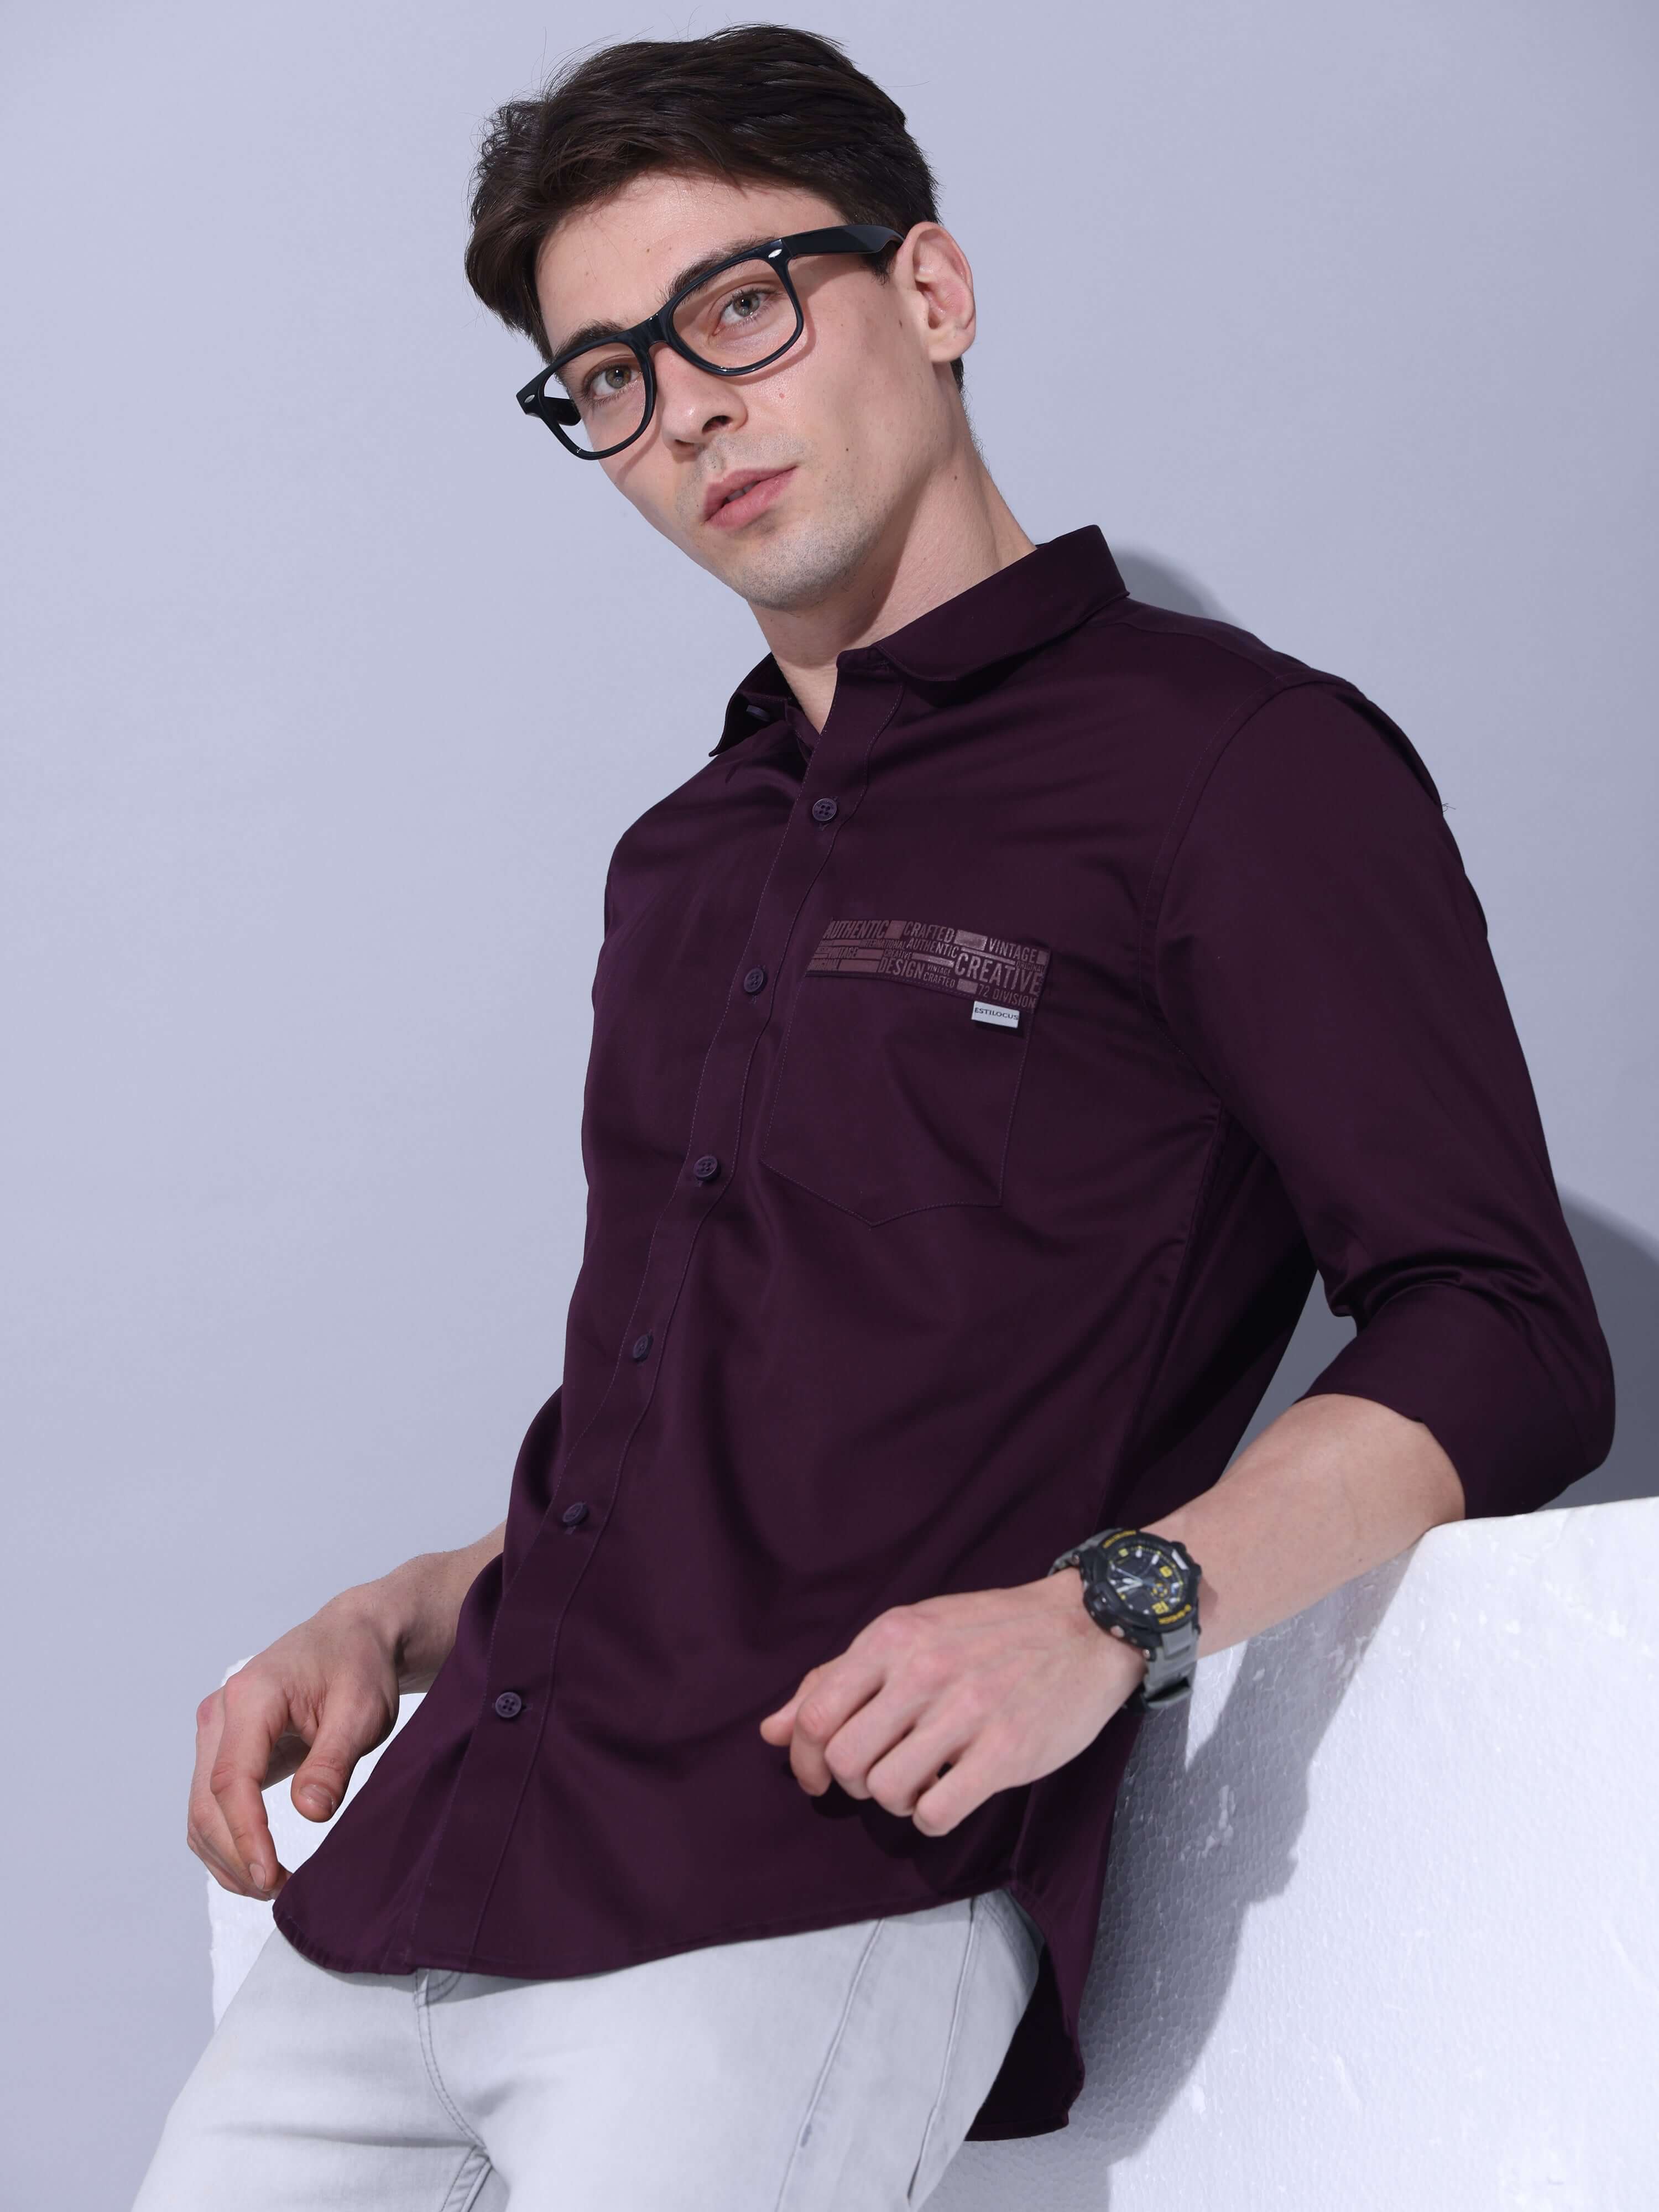 Dark Wine Casual Shirt shop online at Estilocus. • Full-sleeve solid shirt • Cut and sew placket • Regular collar • Double button square cuff. • Single pocket with HD print • Curved hemline • Finest quality sewing • Machine wash care • Suitable to wear wi